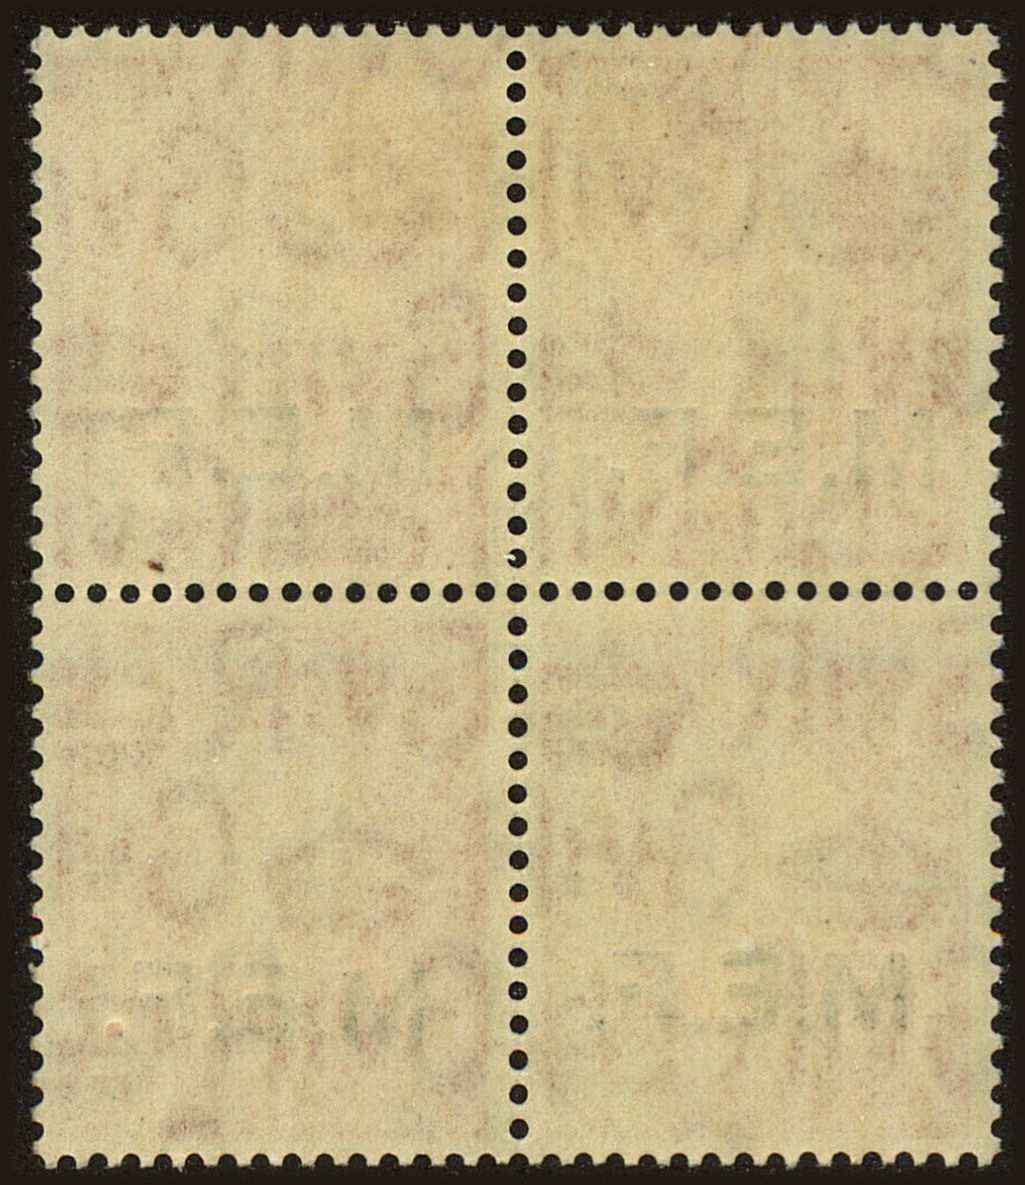 Back view of Middle East Forces Scott #2c stamp